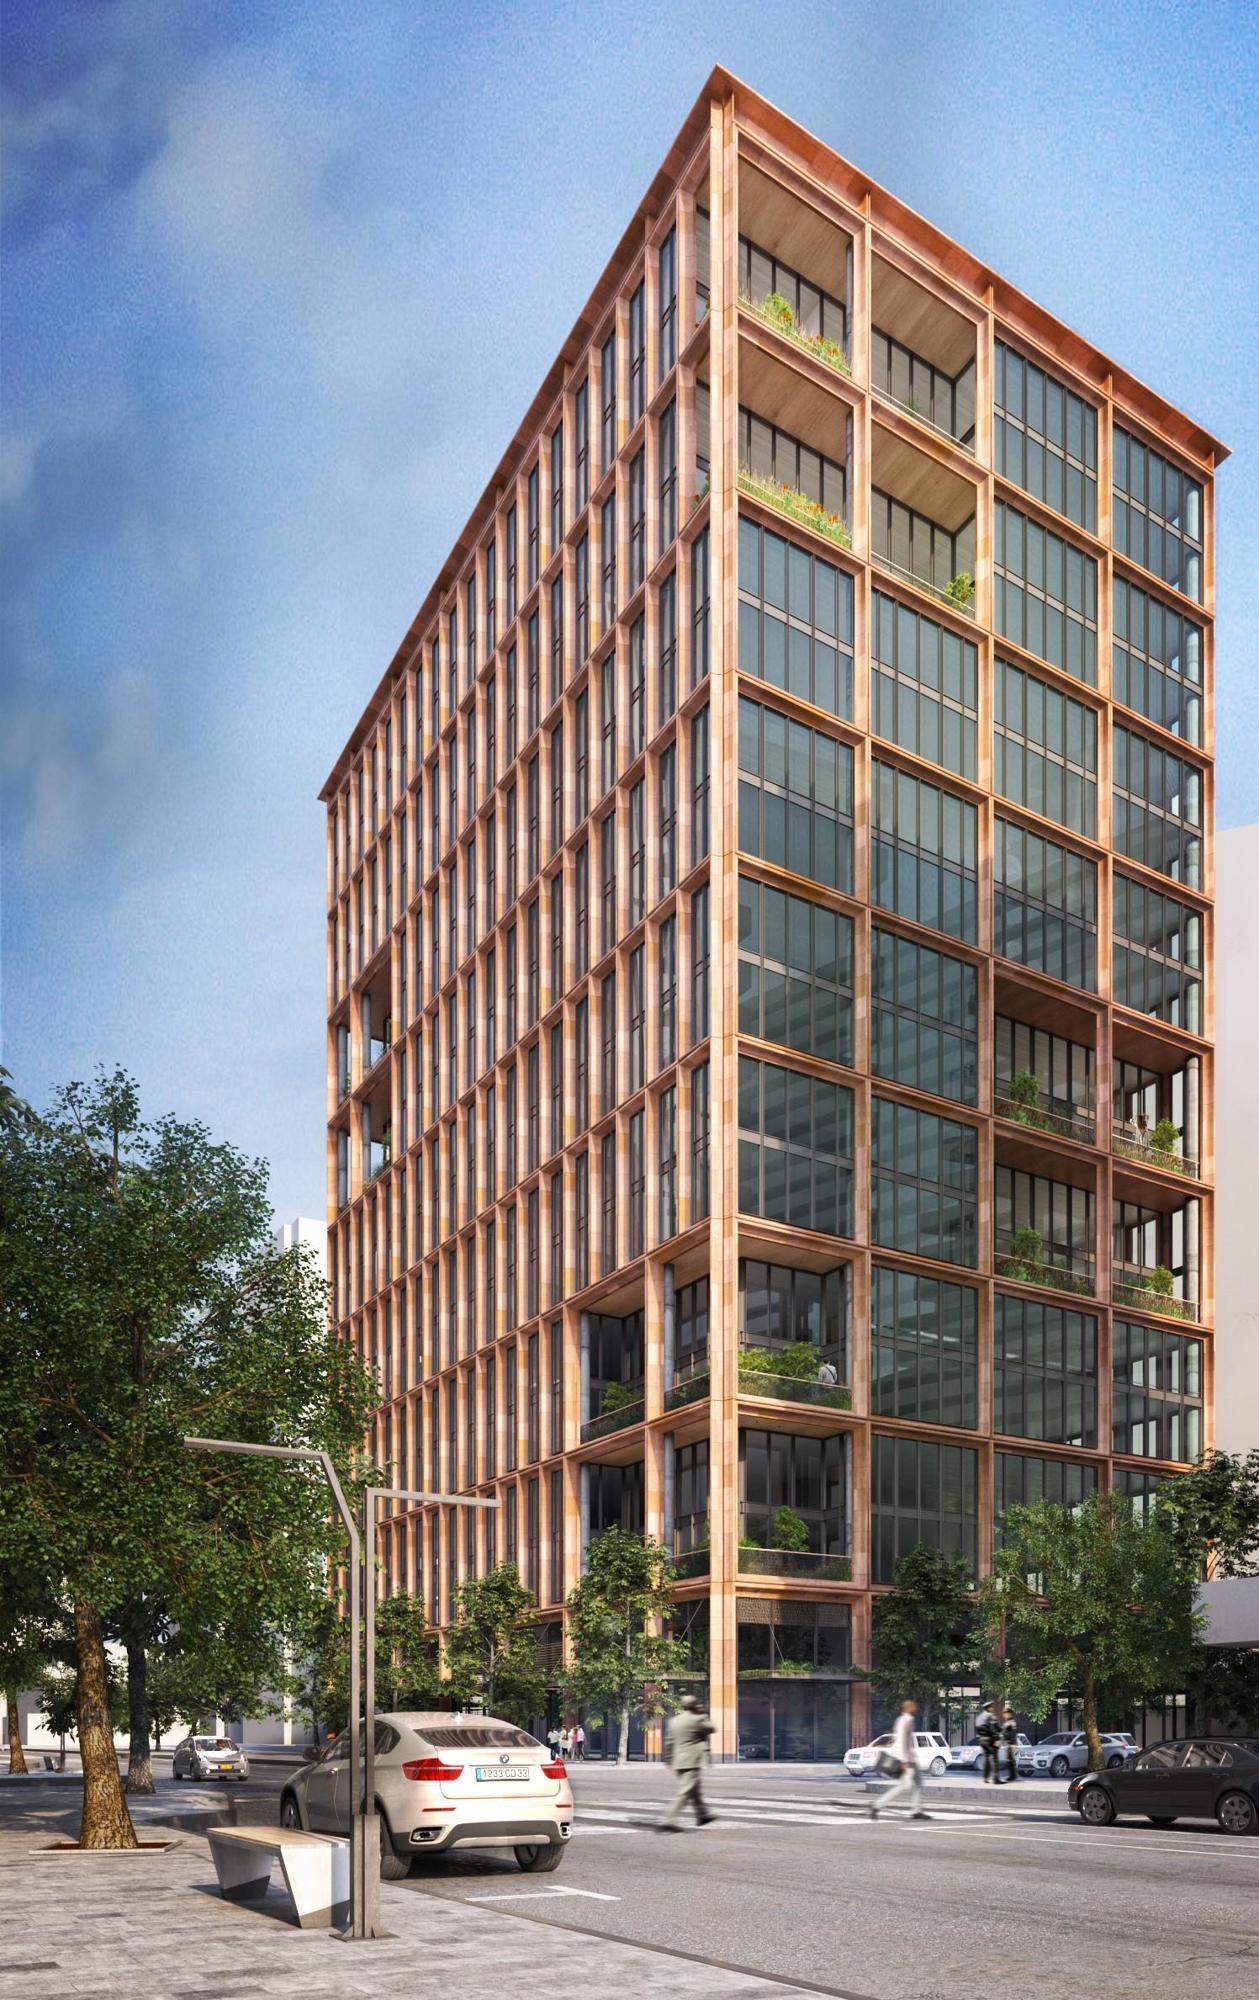  4. 1001 Water St. 20-story office and retail building  380,000 square feet  Opening late 2021